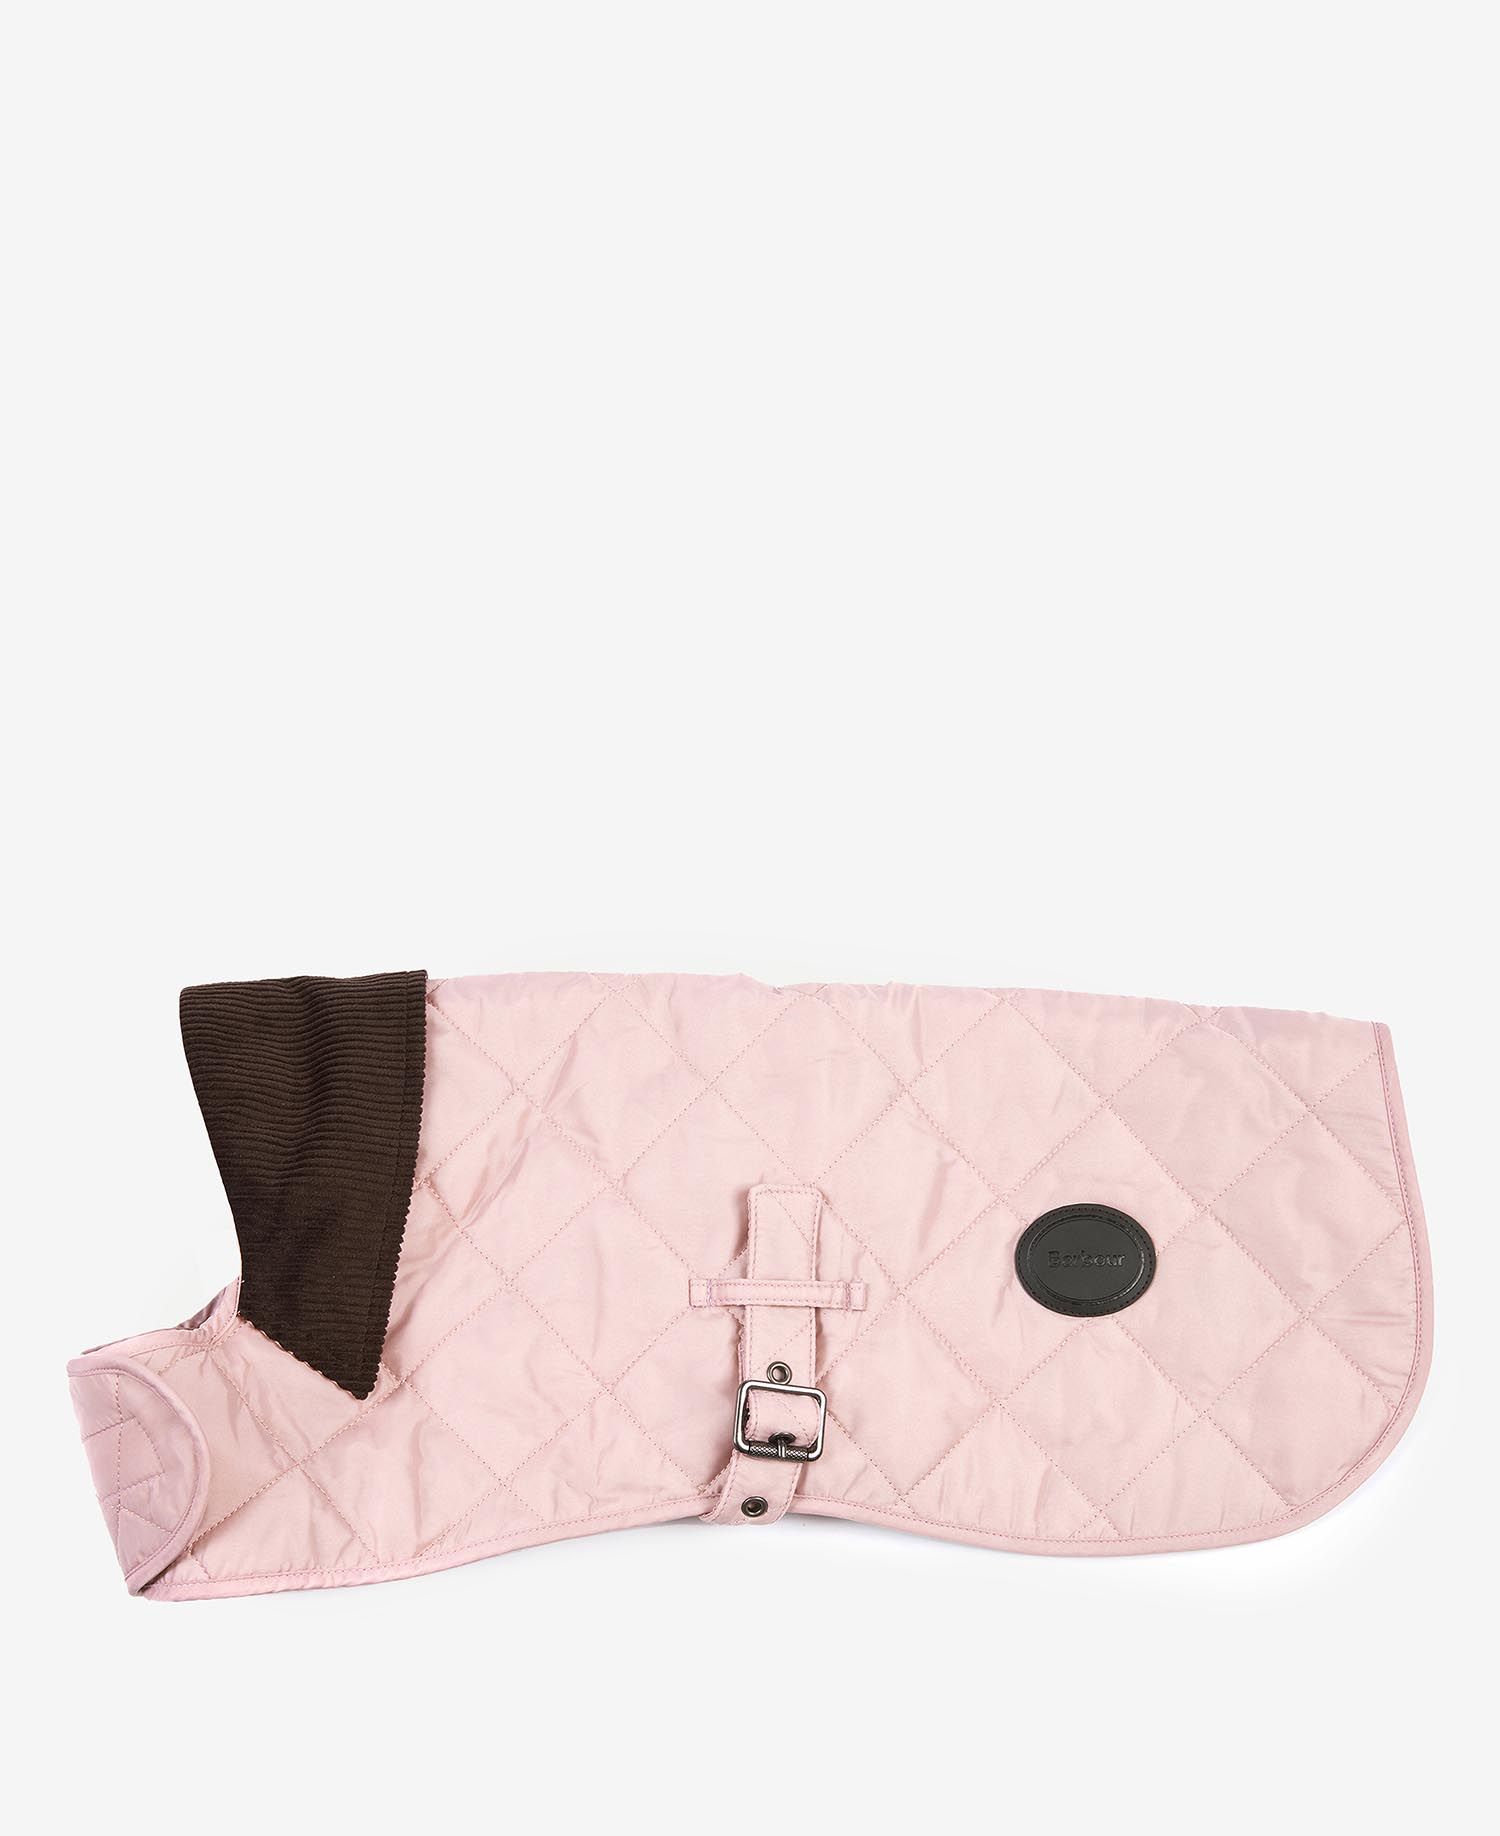 Barbour Quilted Dog Coat Pink